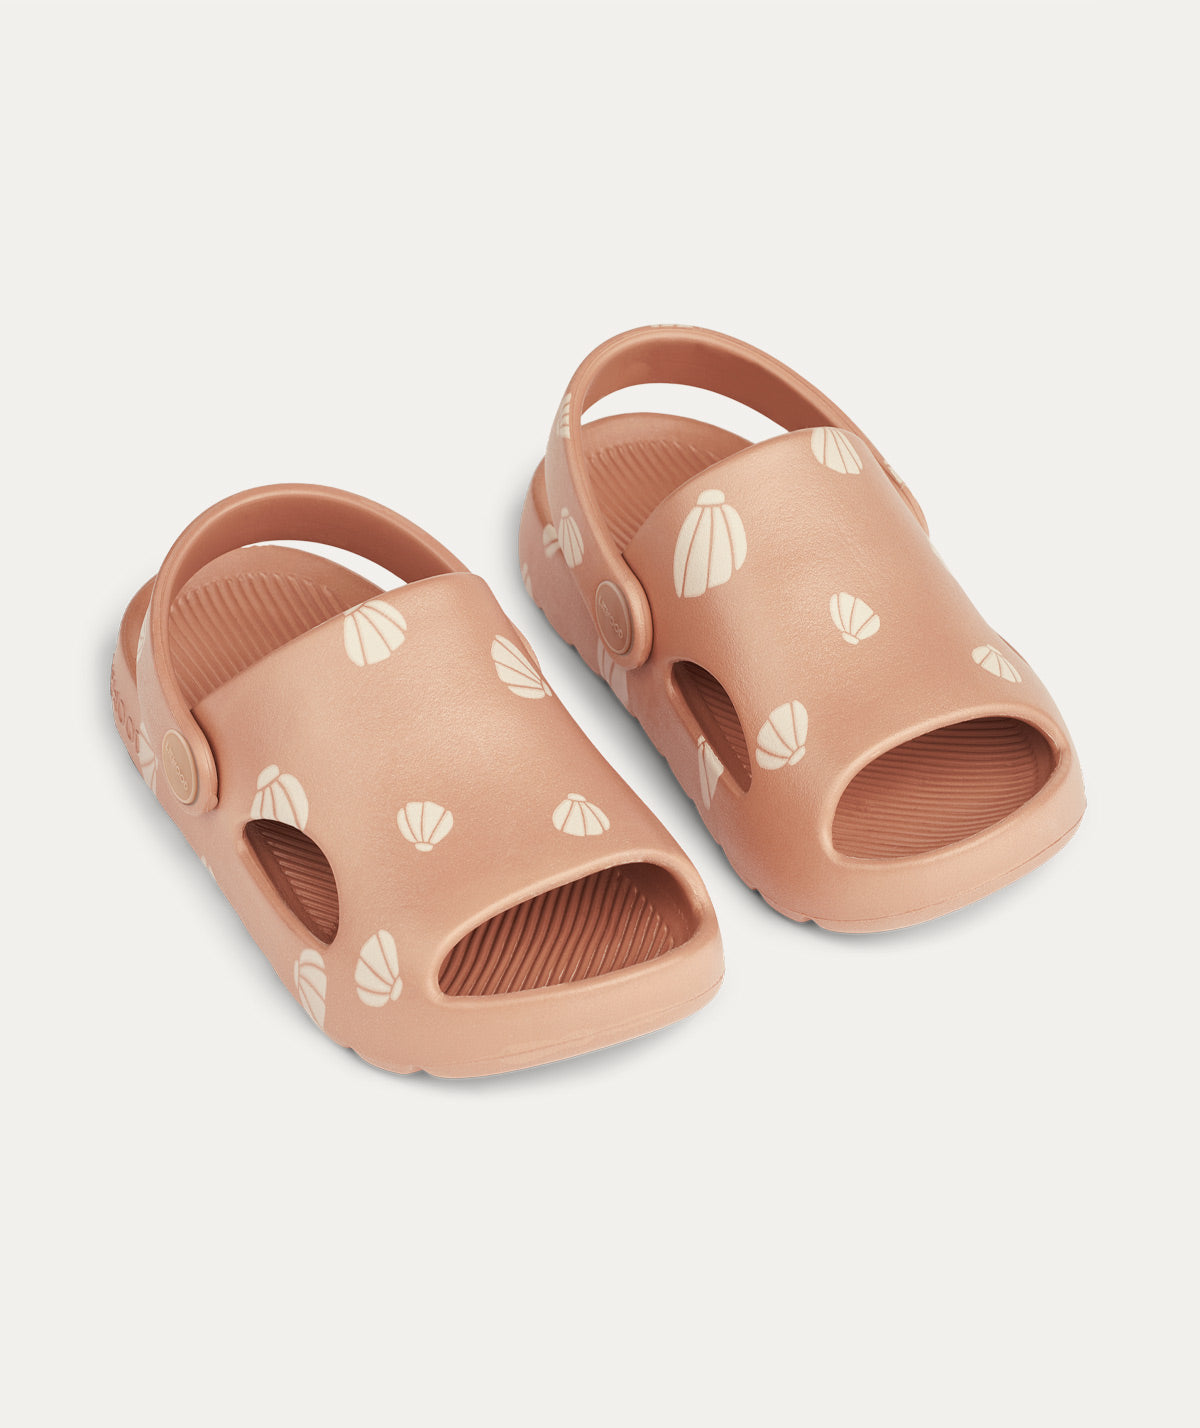 Buy the Liewood Morris Sandals online at KIDLY